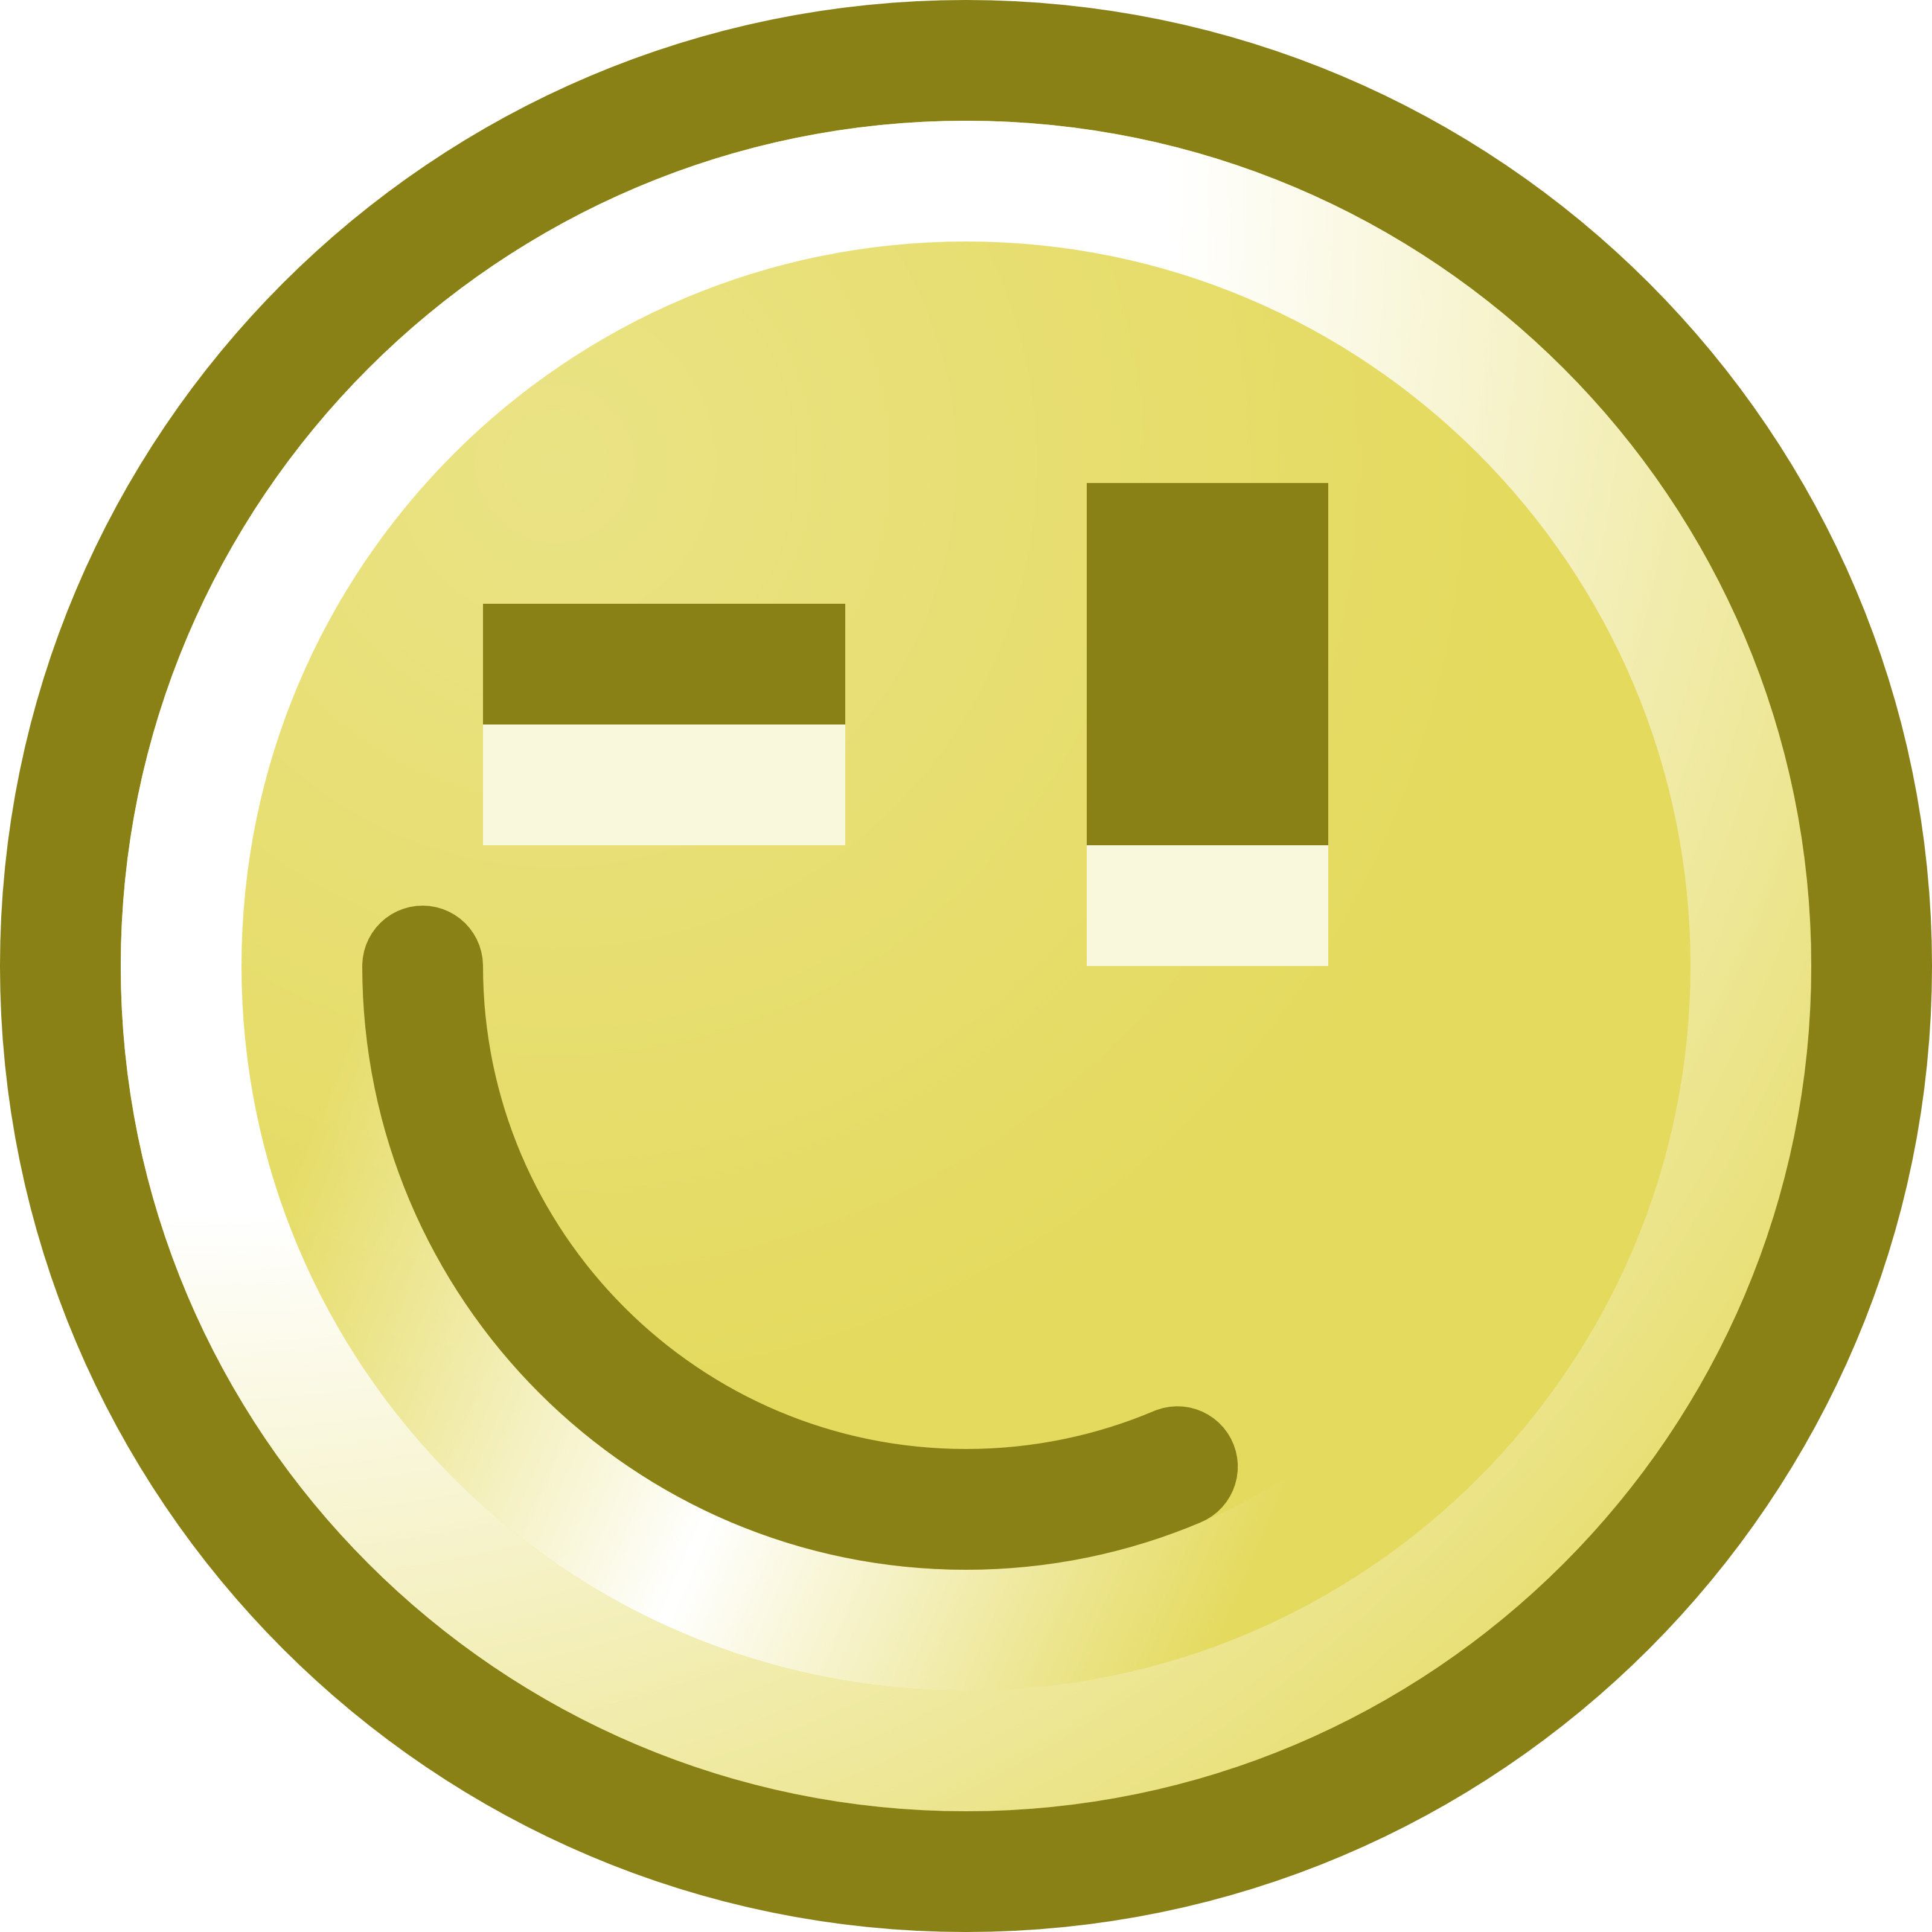 Wink smiley face clip art vector free clipart images image